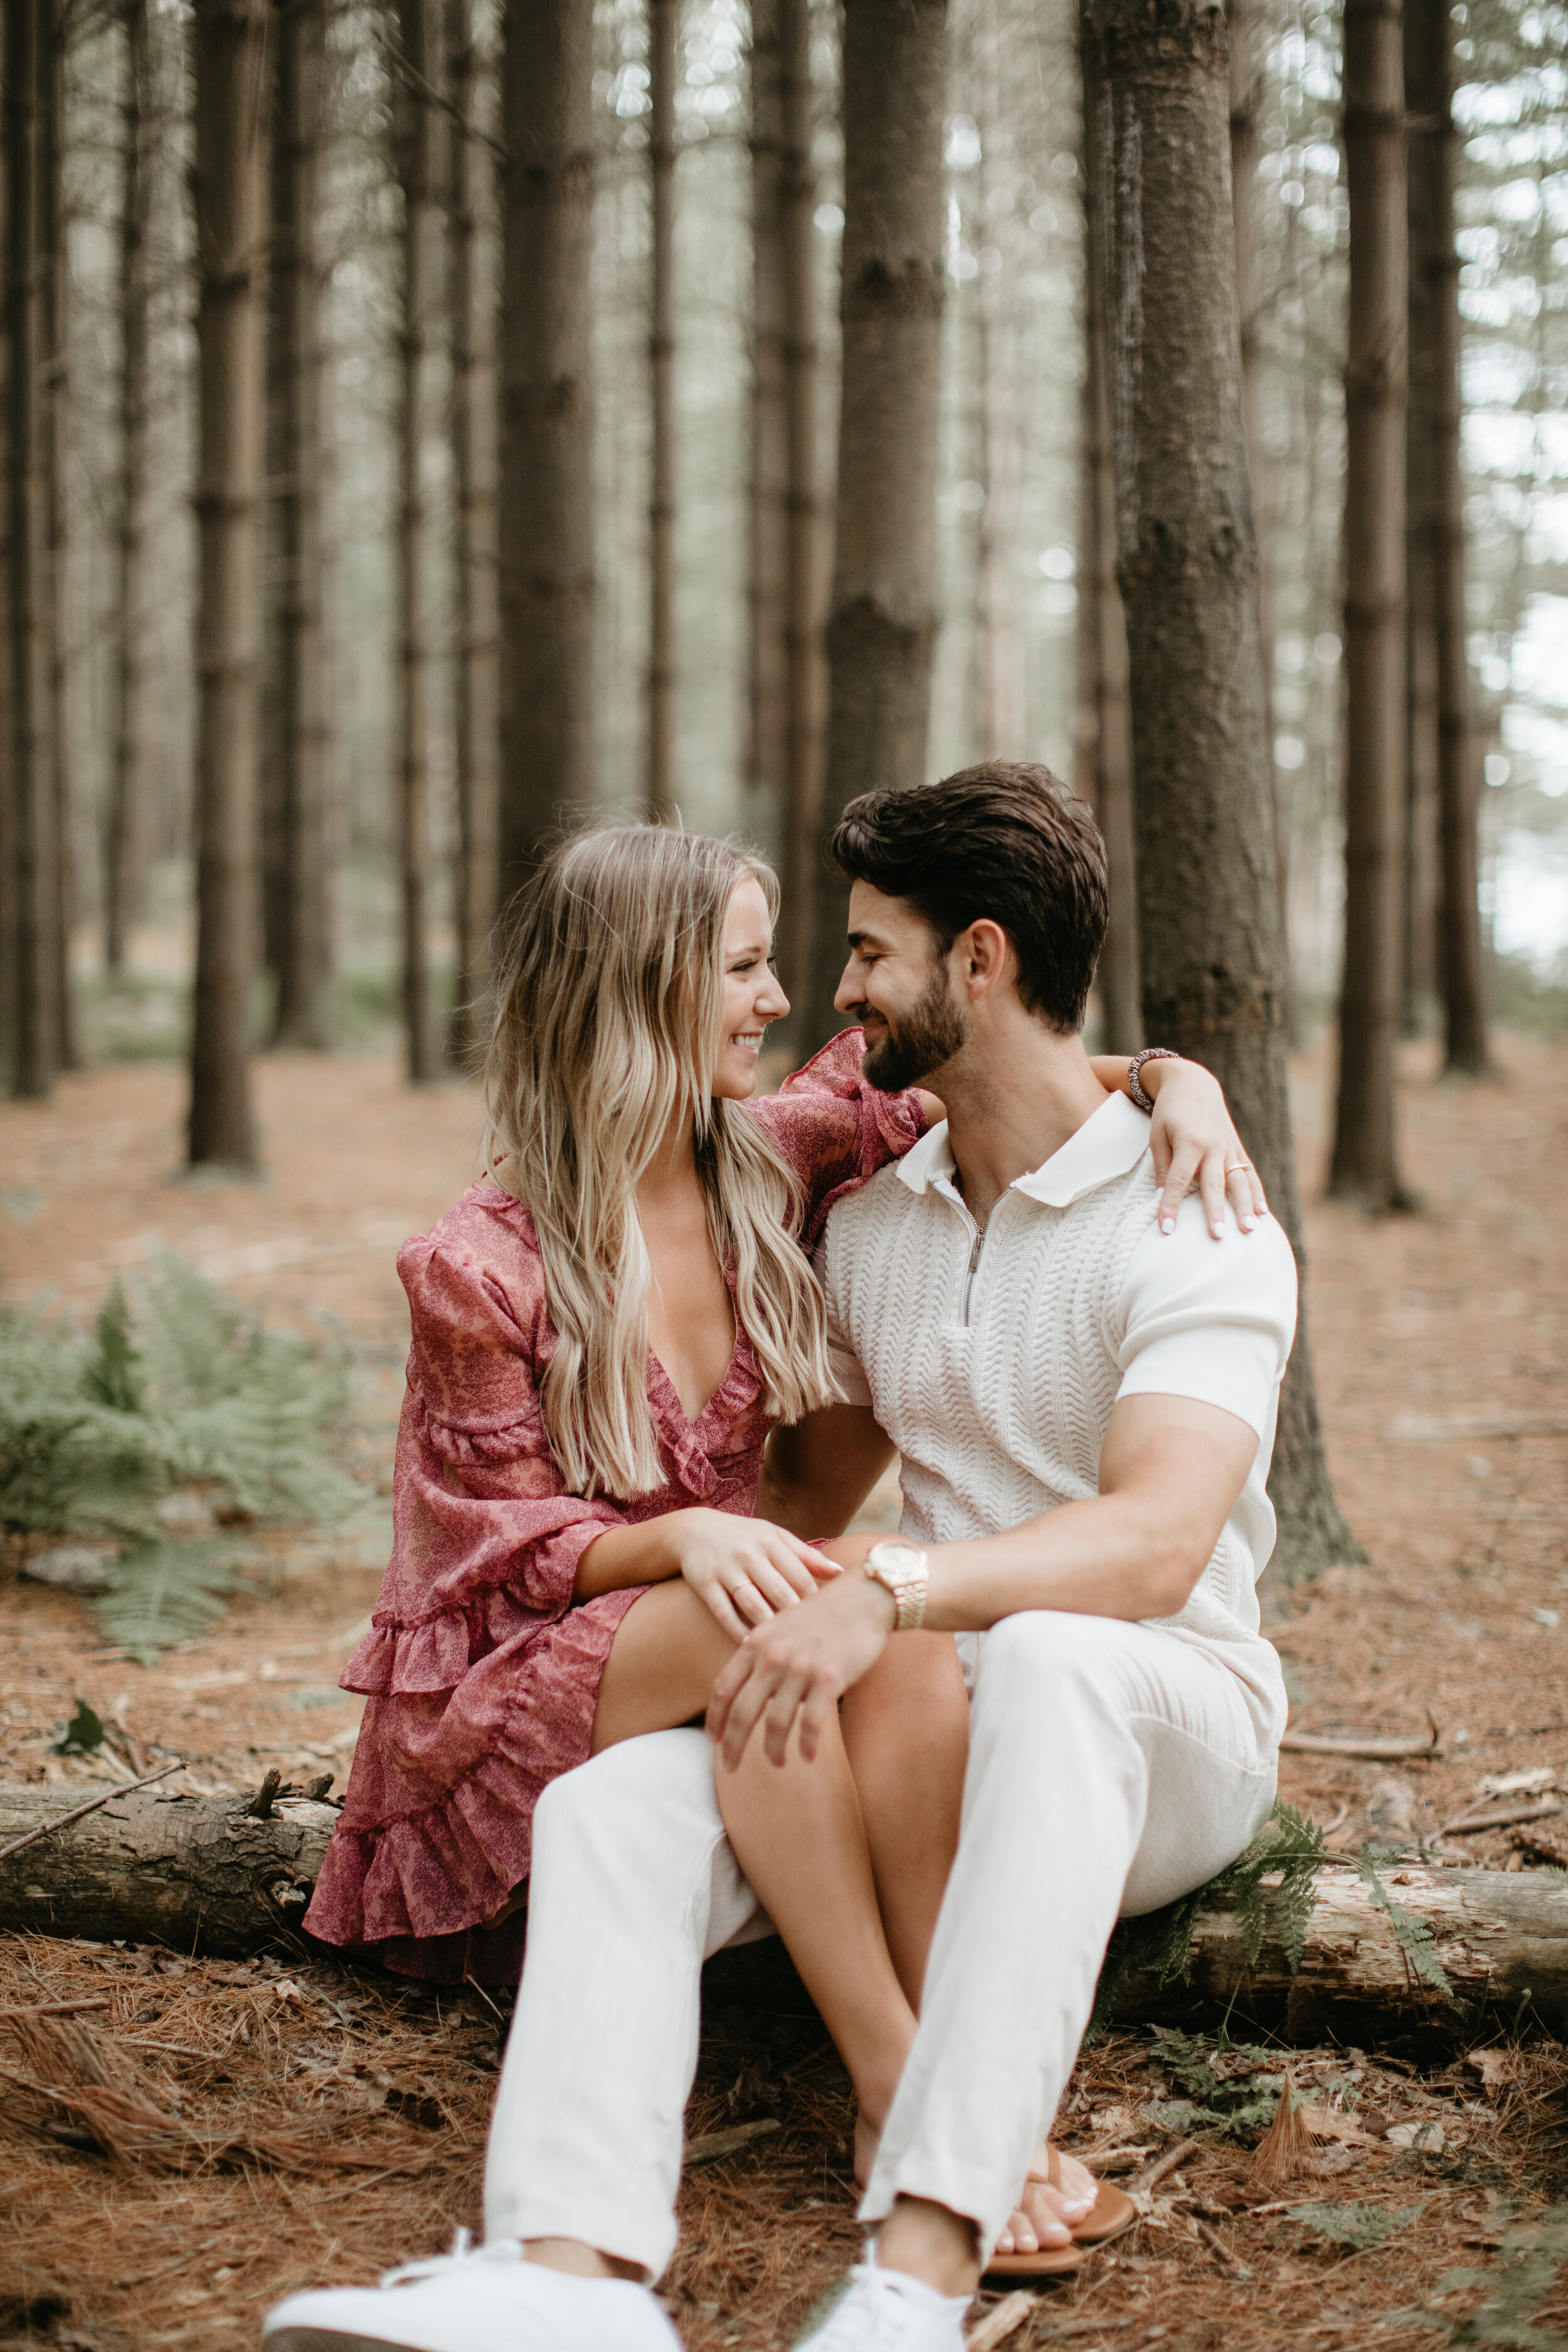 Nicole-Daacke-Photography-michaux-state-forest-elopement-adventure-engagement-session-pennsylvania-elopement-pa-elopement-photographer-gettysburg-photographer-state-park-elopement-engagement-session-pennsylvania-waterfall-108.jpg